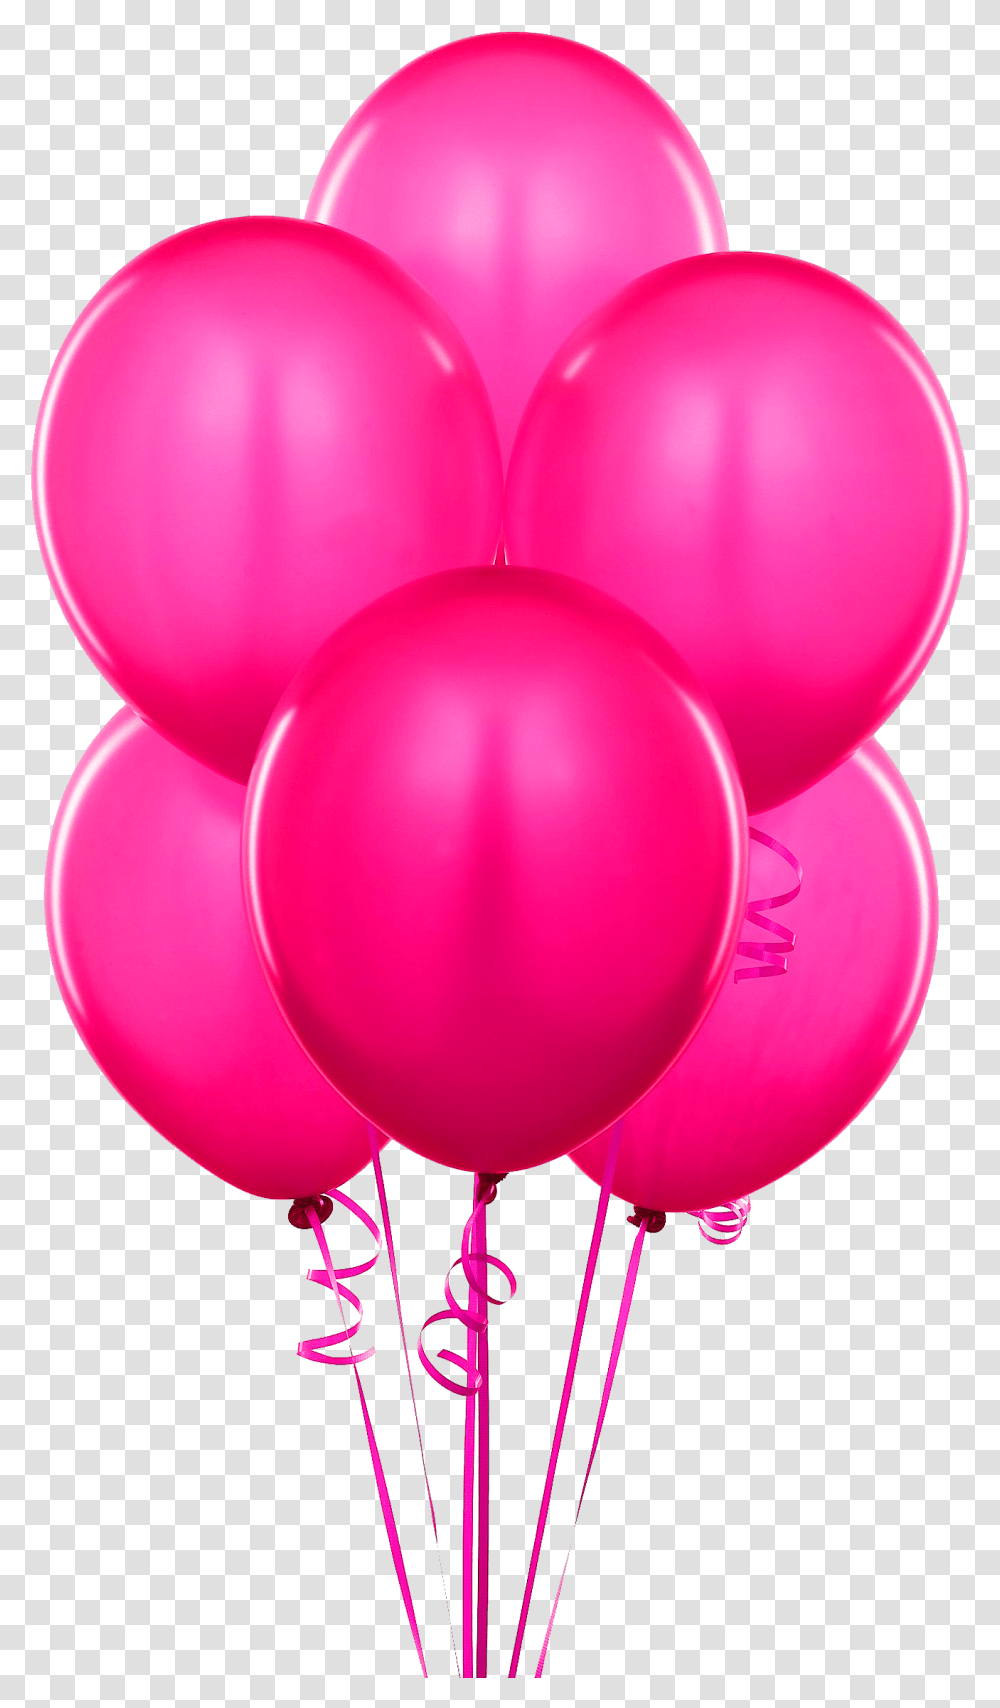 Balloons By Renee Llc Pink Balloons Transparent Png